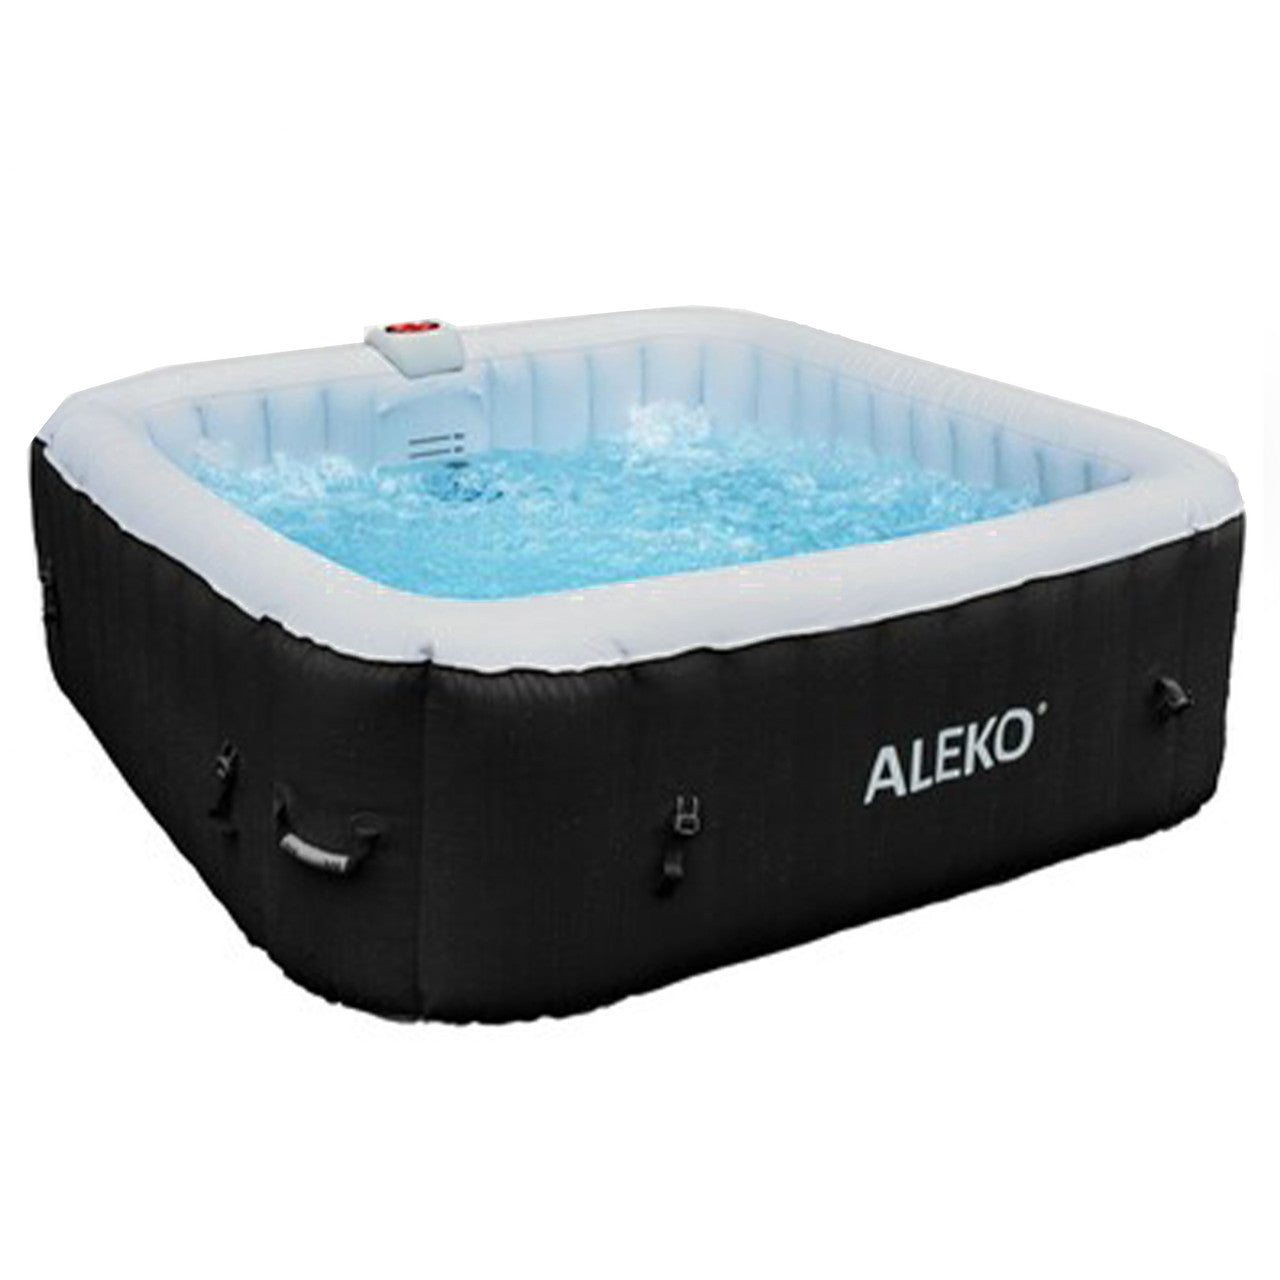 Inflatable Jetted 6-Person Square Hot Tub & Cover - 265 gal